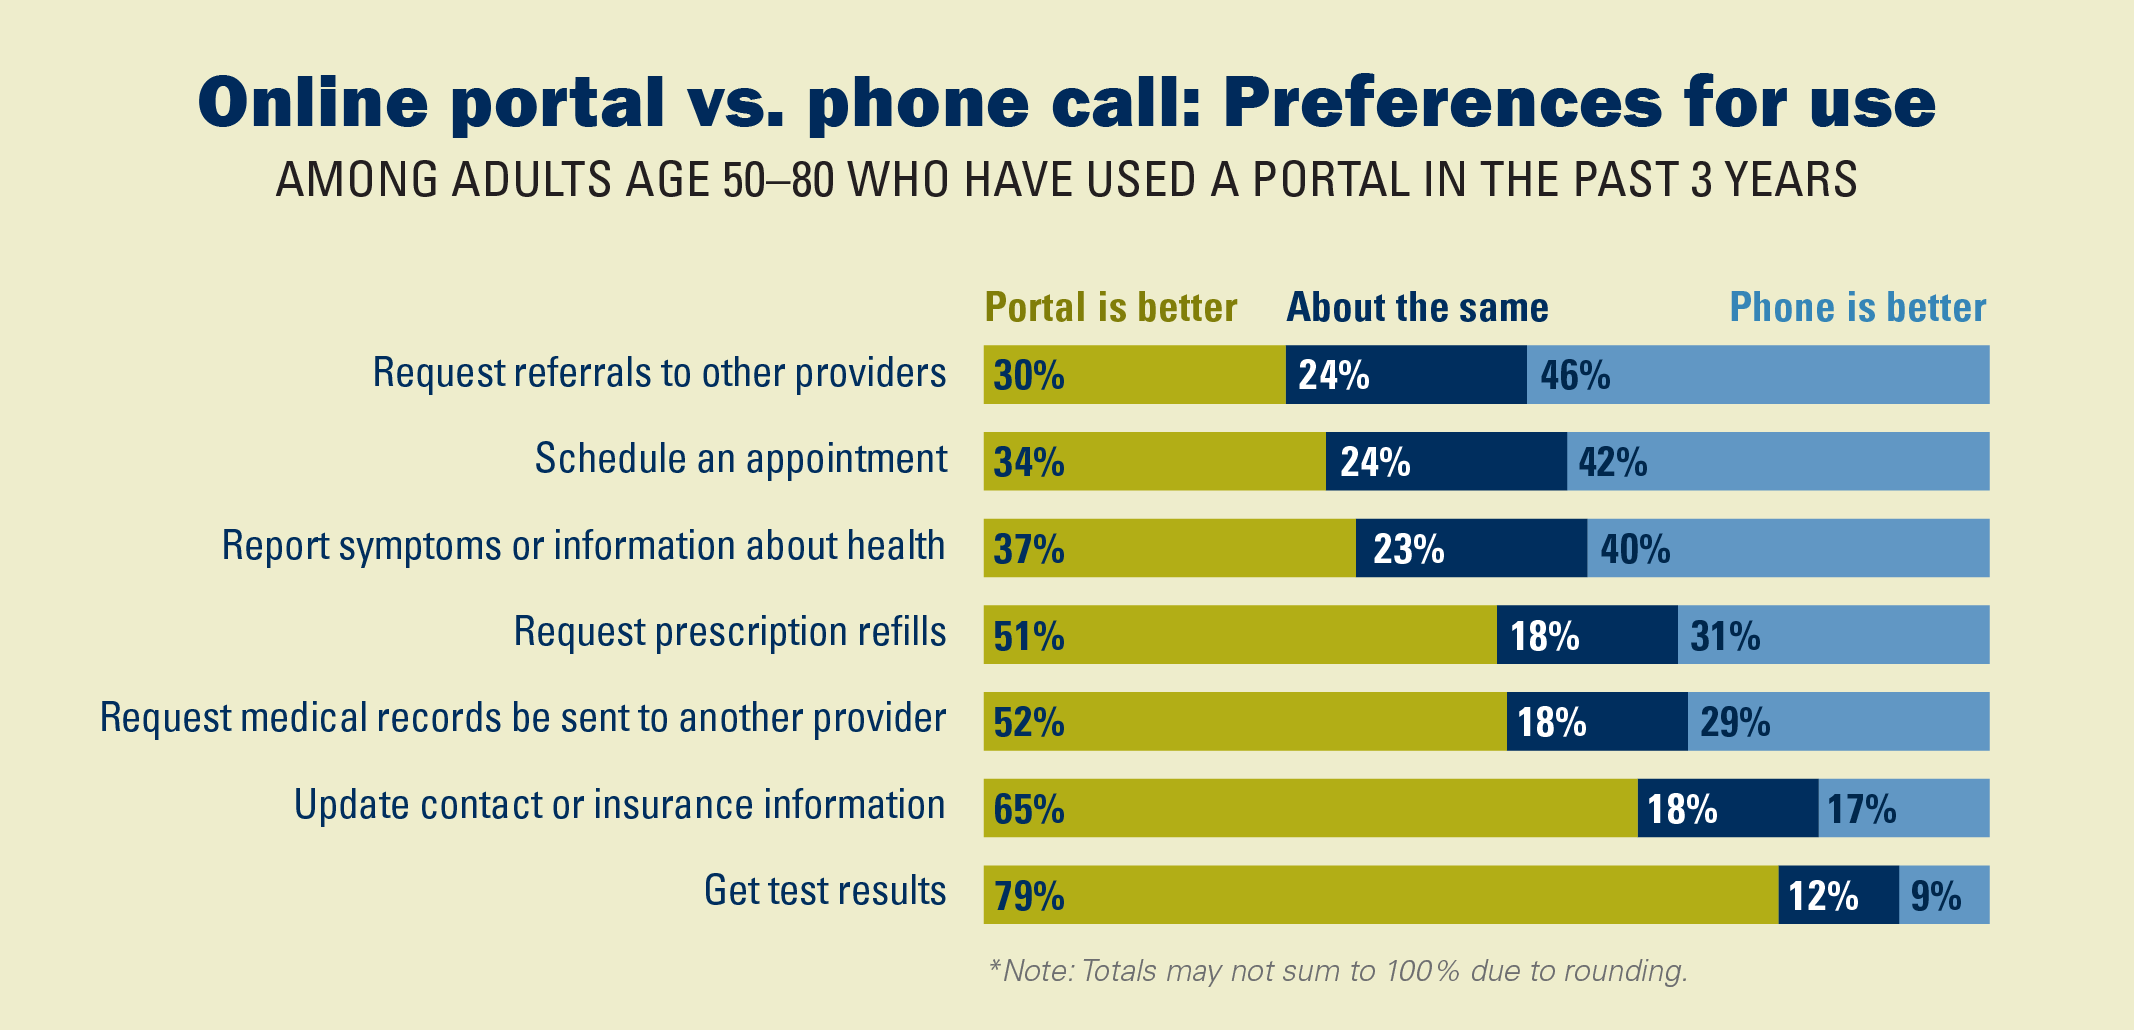 Online portal vs. phone call: Preferences for use